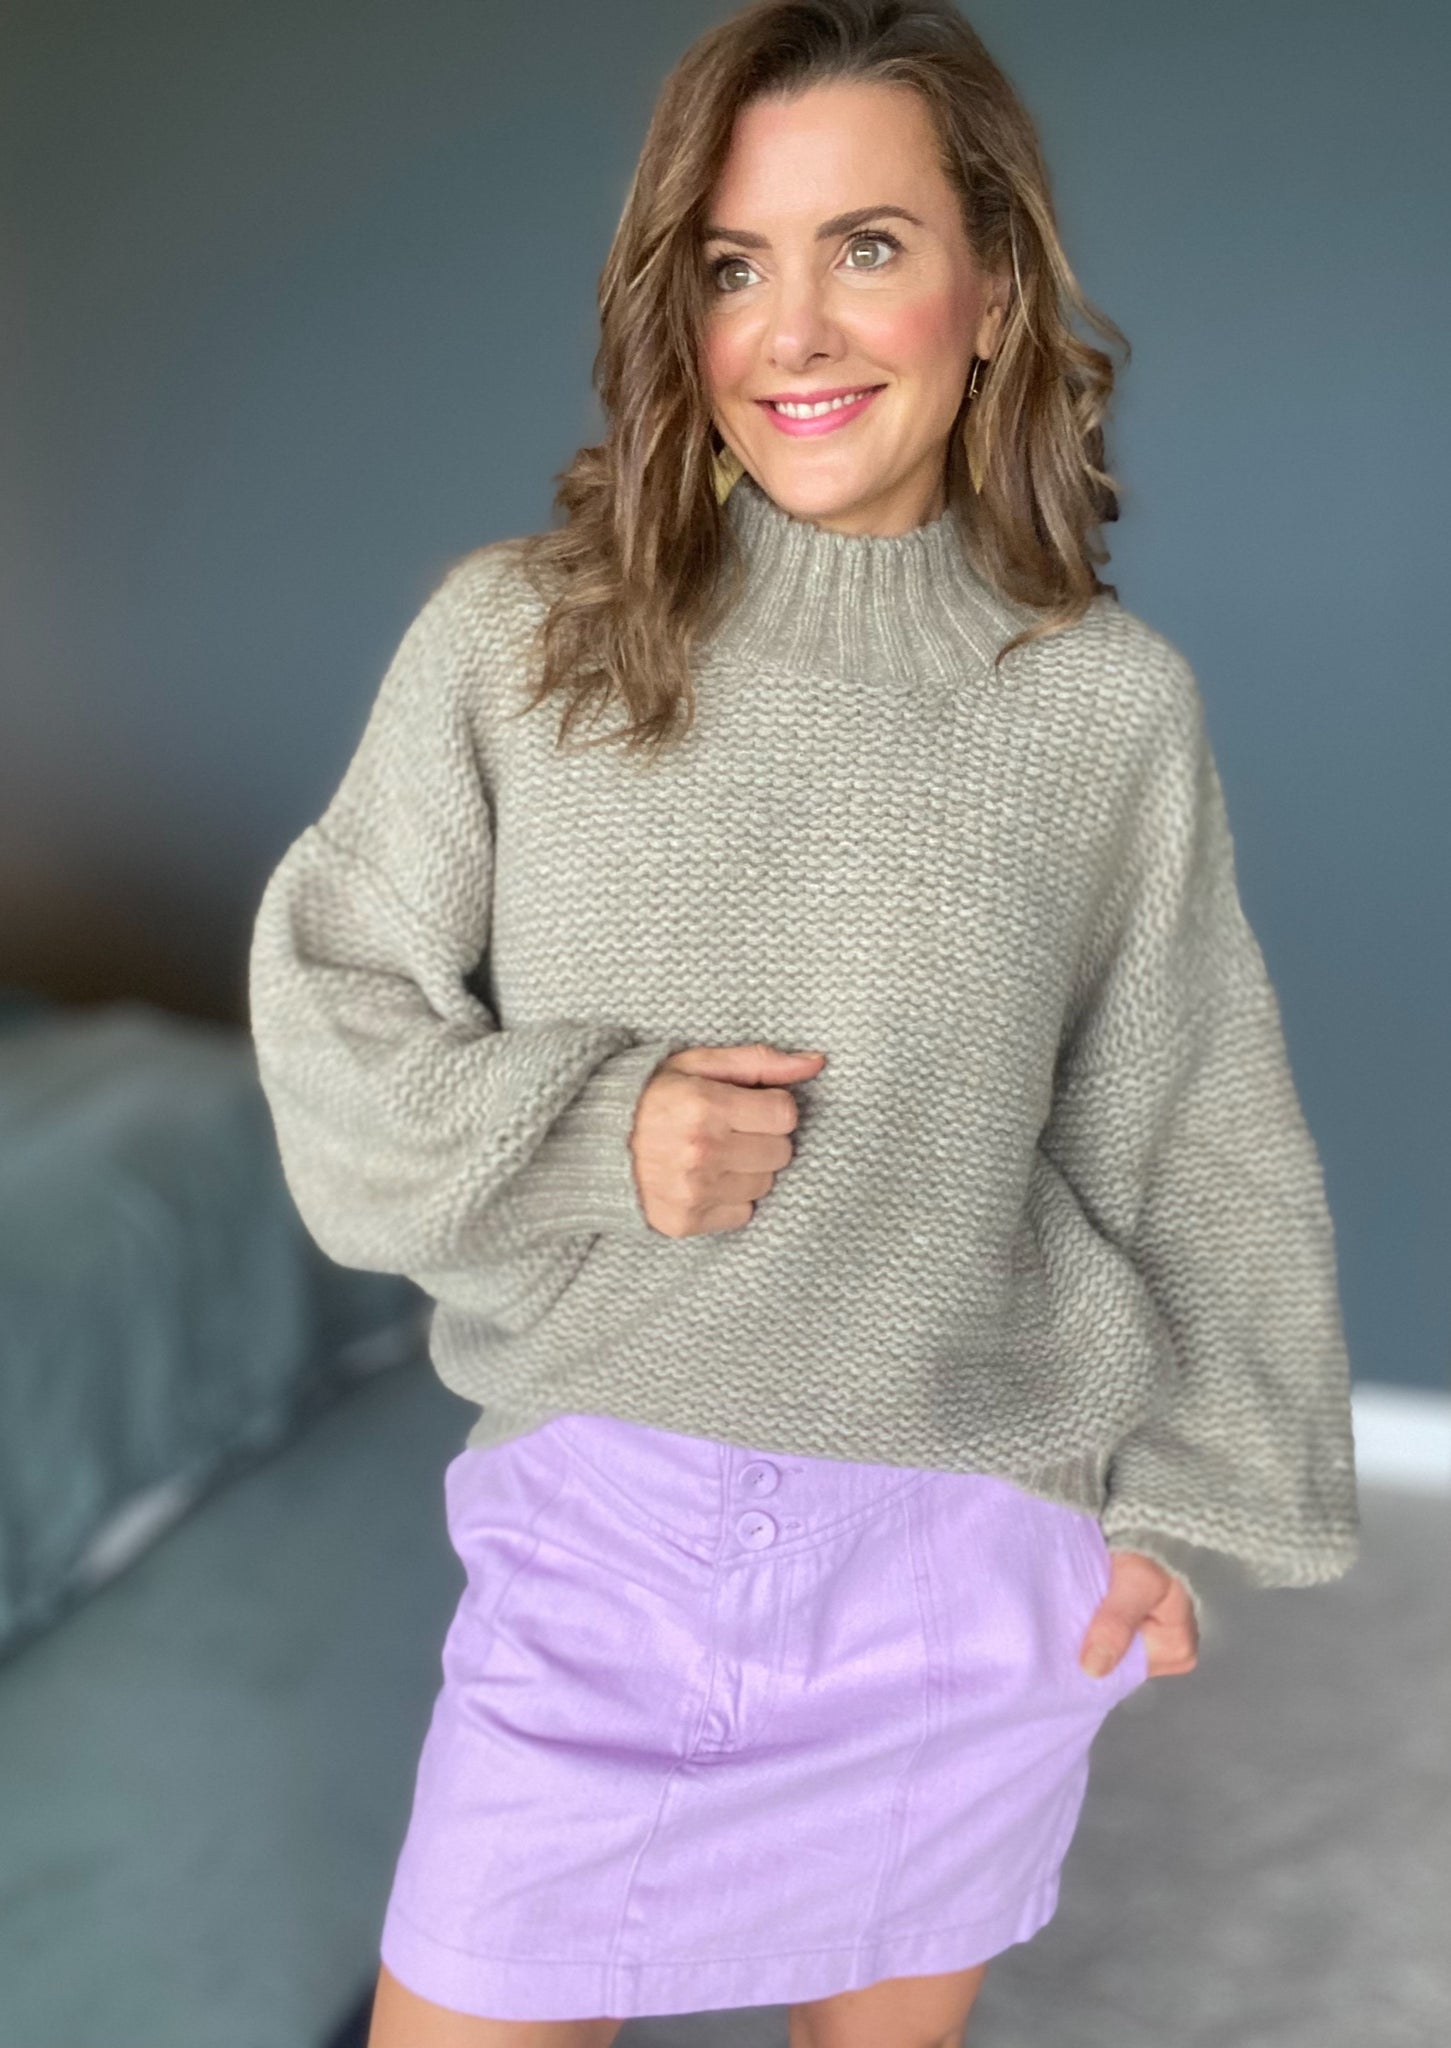 Wren Lilac Mini - by MinkPink  A cute cotton lilac mini that's perfect with tights and boots plus a chunky knit in winter, or with cotton tees and blouses in summer.  We love it paired with:  Margot Blouson Jumper in Sage seen here  New Moon Jumper in Khaki/Lilac (2nd image)   Wild Child Tee